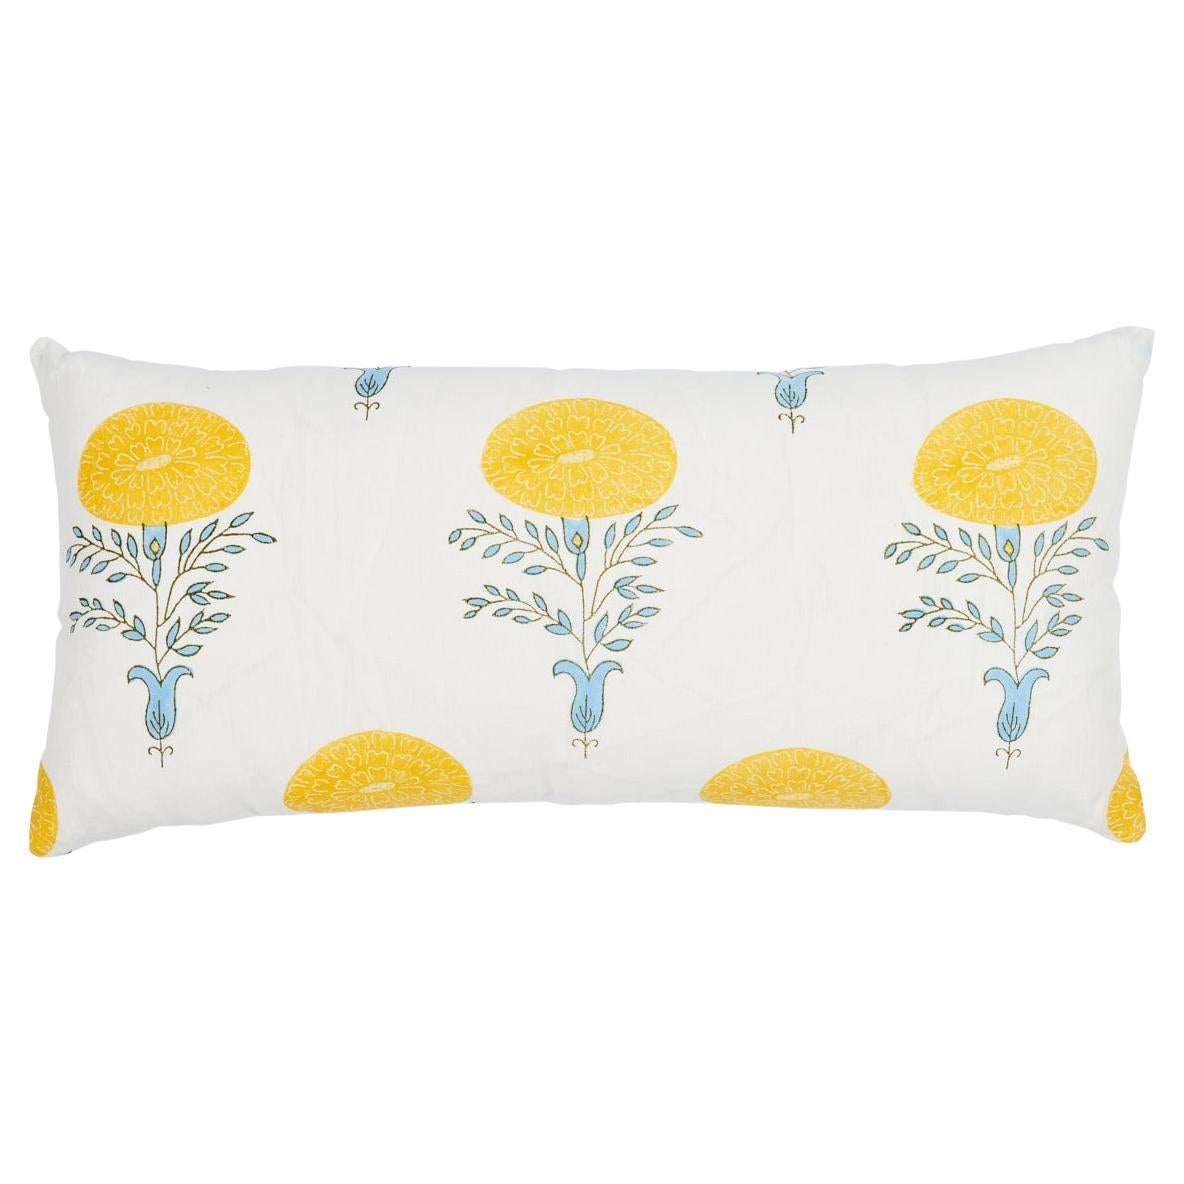 Schumacher Marigold 30" x 14" Pillow in Yellow For Sale